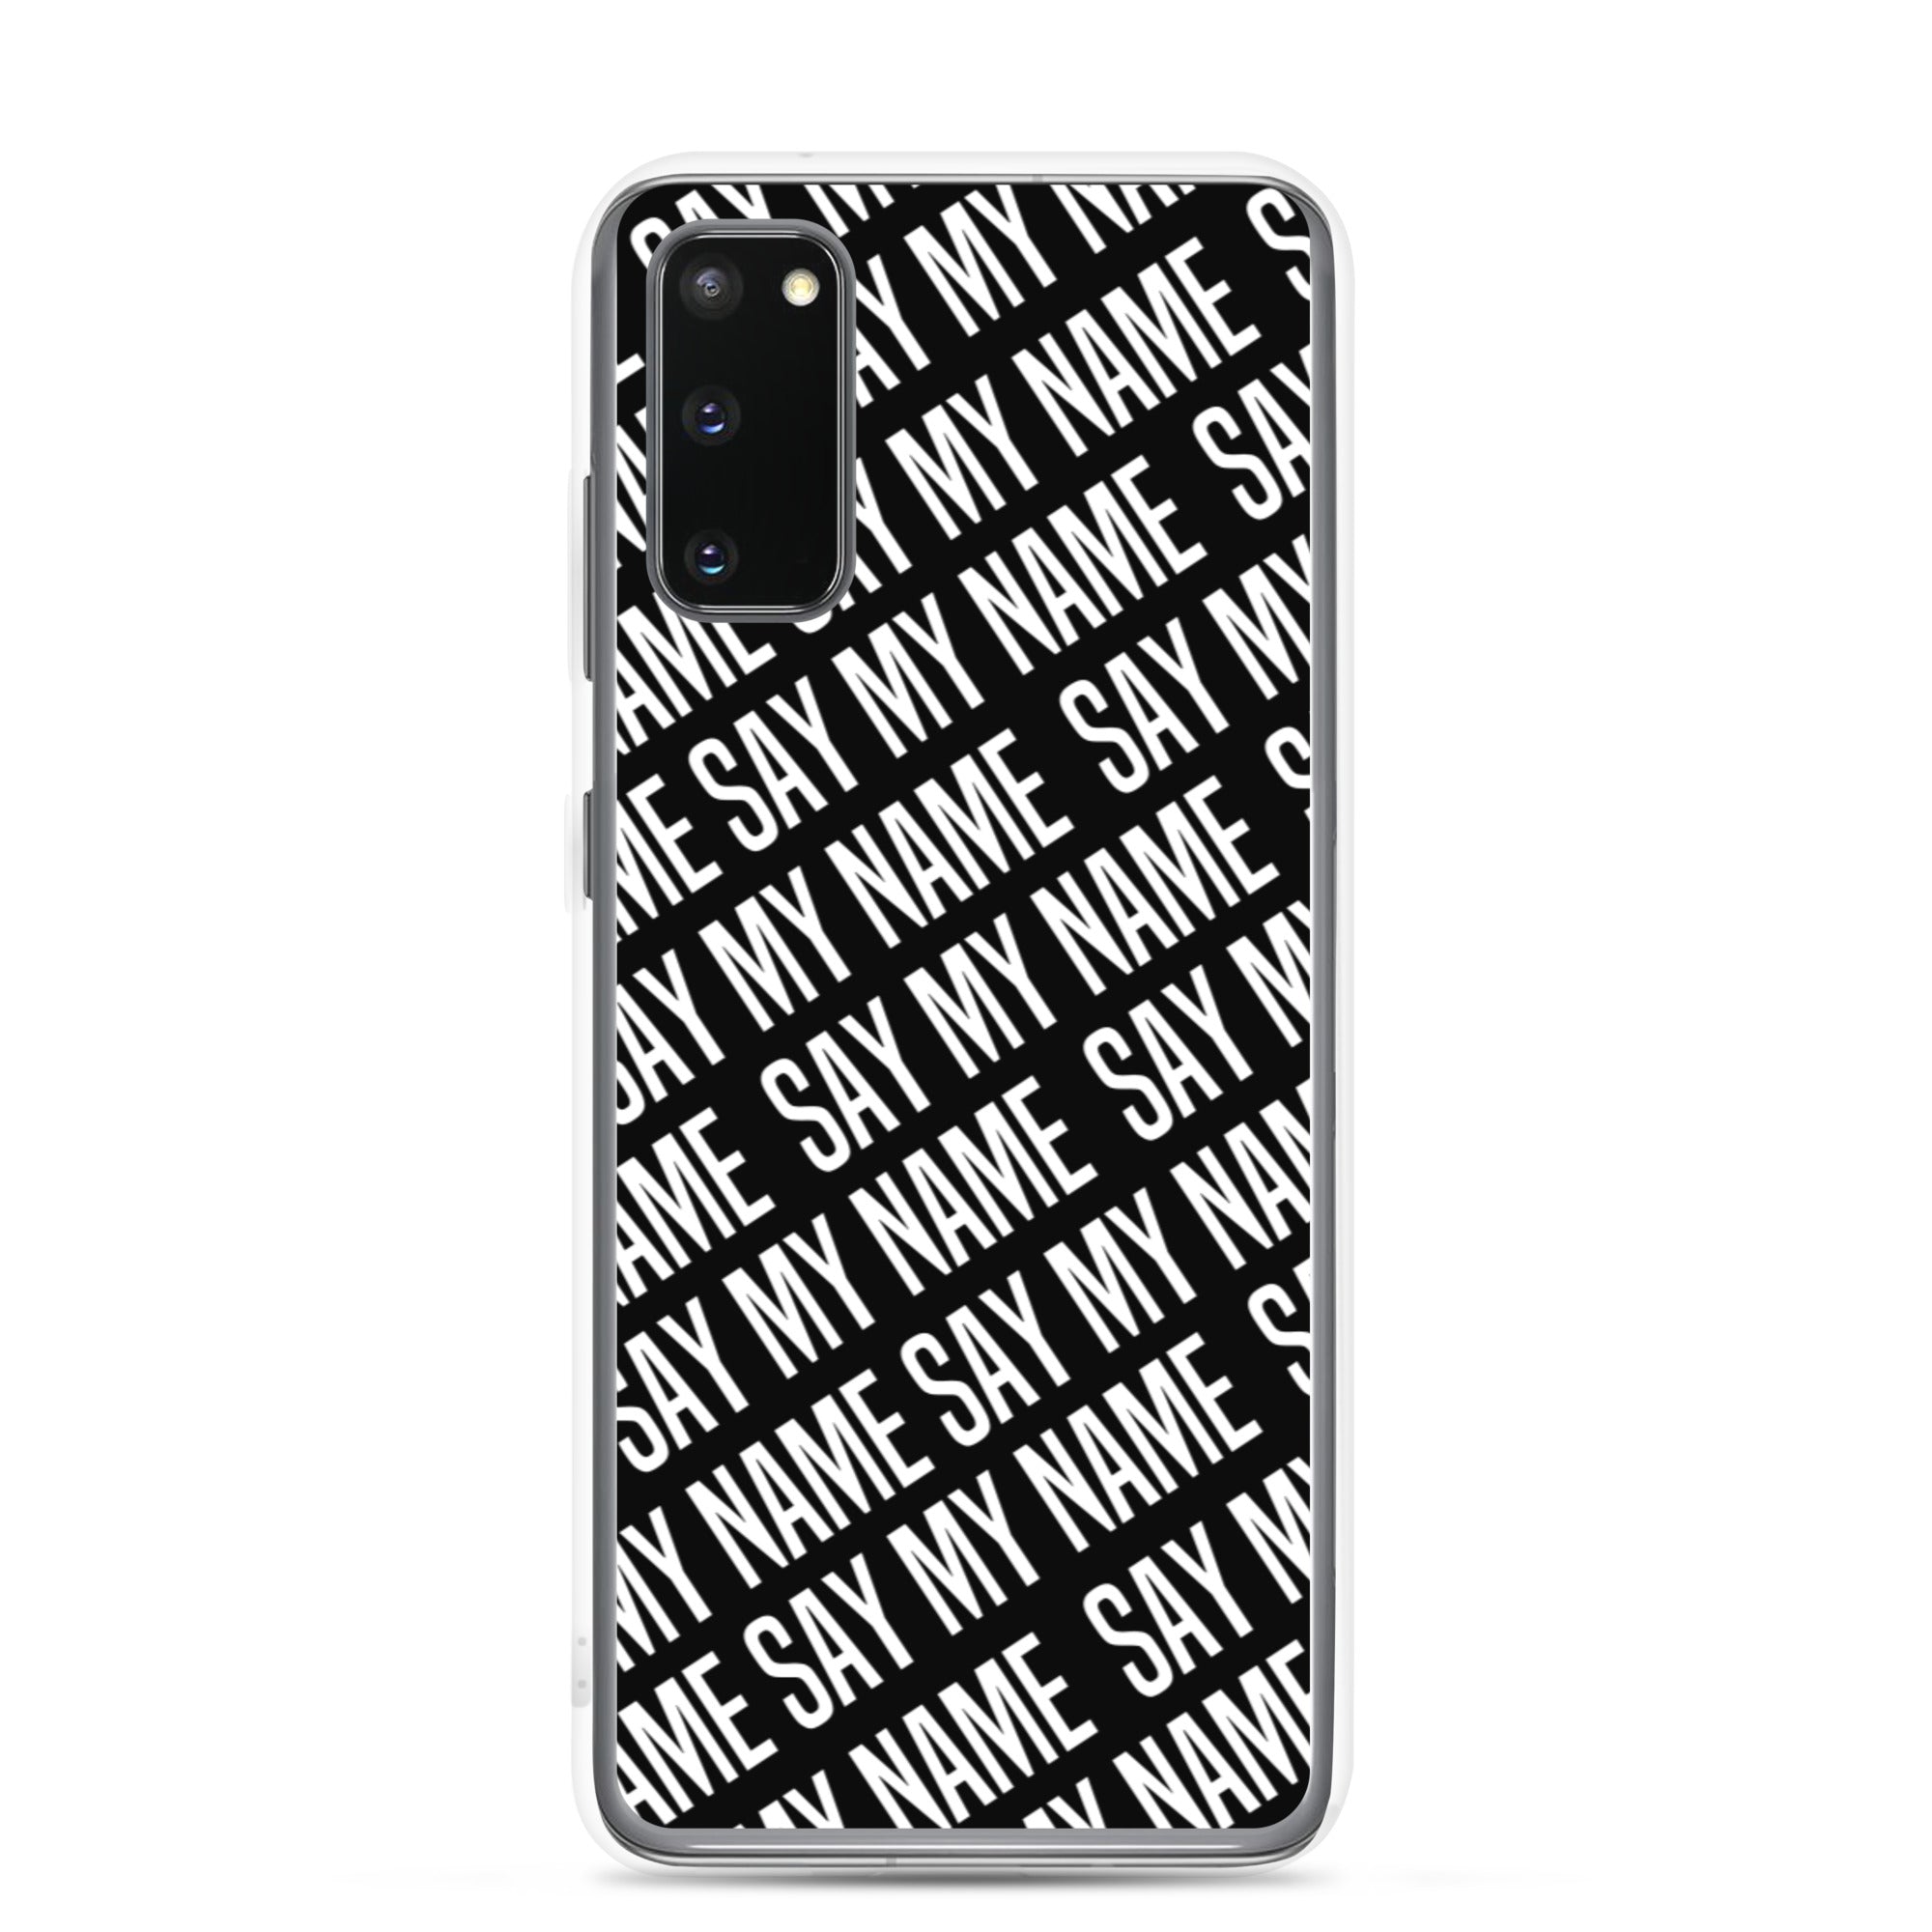 Coque "SAY MY NAME" Samsung